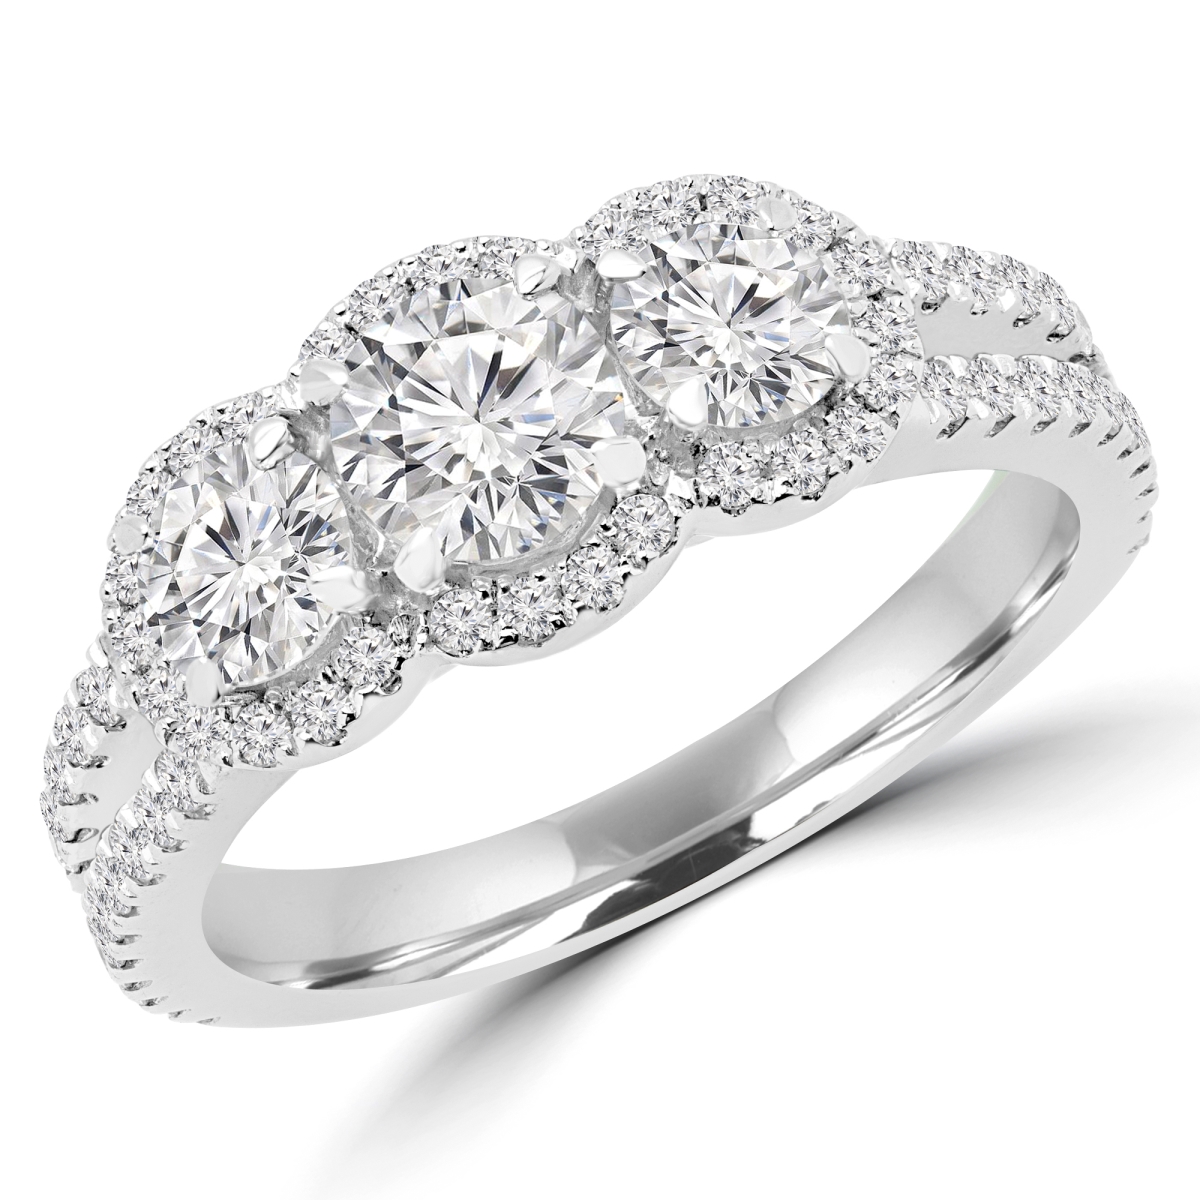 Picture of Majesty Diamonds MD180058-P 1.3 CTW Round Diamond Three-Stone Halo Engagement Ring in 14K White Gold